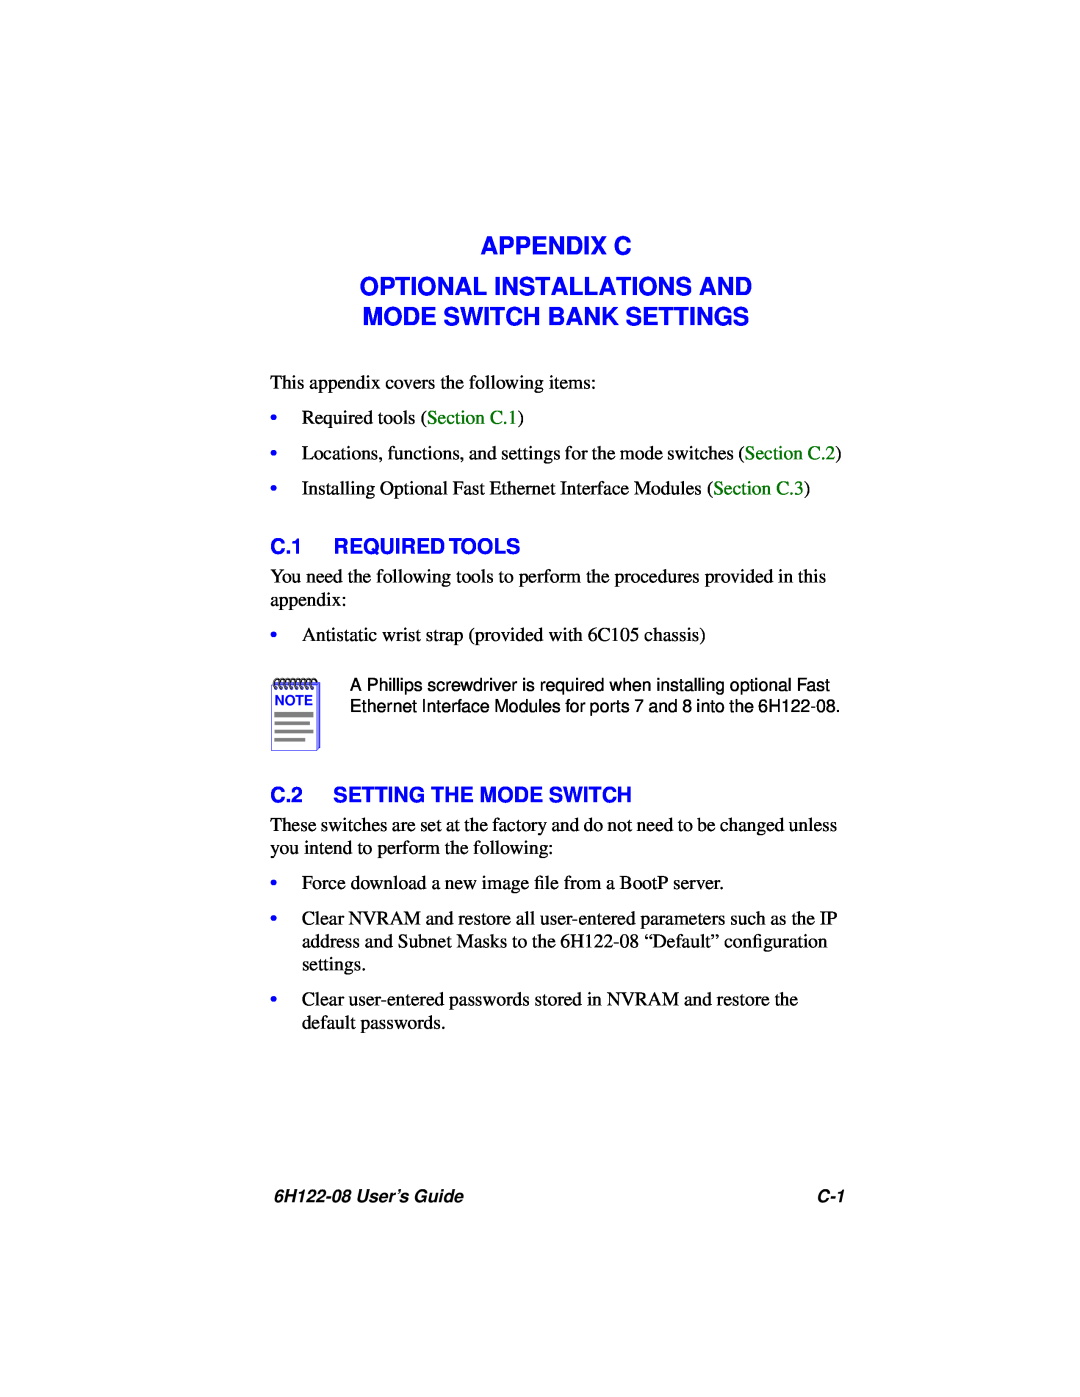 Cabletron Systems 6H122-08 manual Appendix C Optional Installations And Mode Switch Bank Settings, C.1 REQUIRED TOOLS 